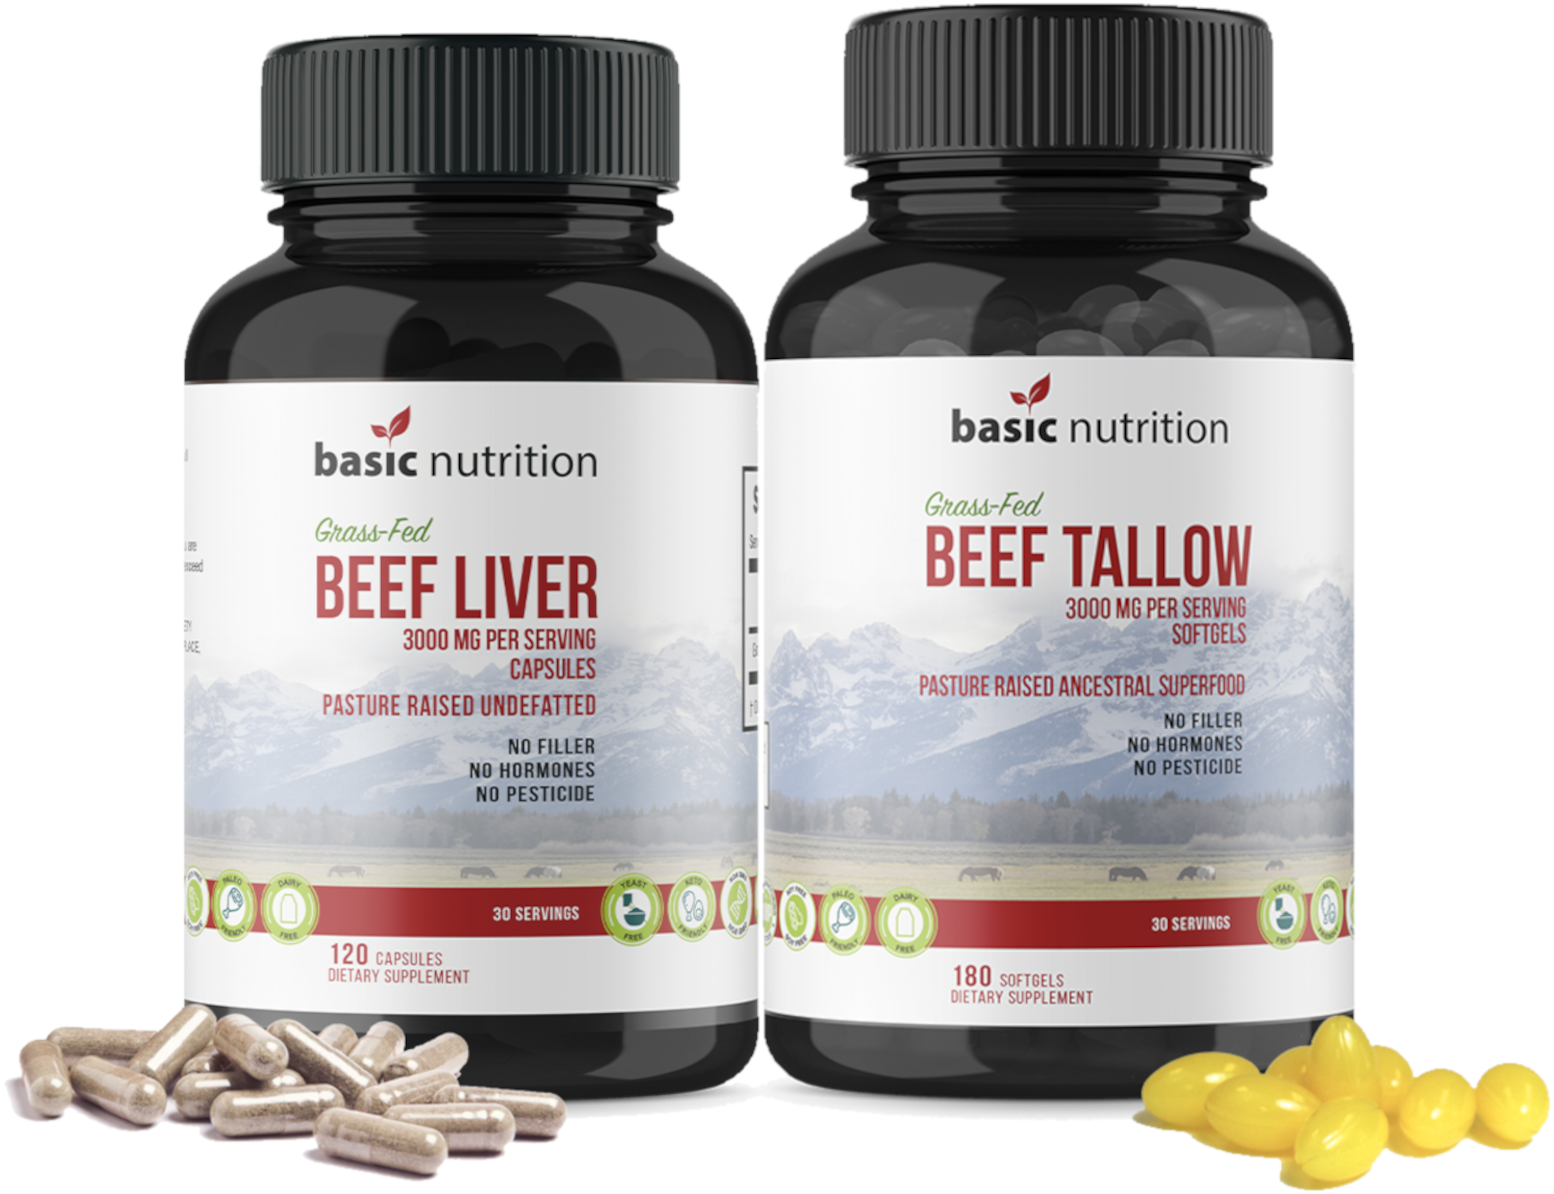 Basic Nutrition - Carnivore Bundle |Pasture Raised Beef Liver & Tallow, 3000mg, Grass-Fed, Hormone-Free, Non-GMO, Made in USA